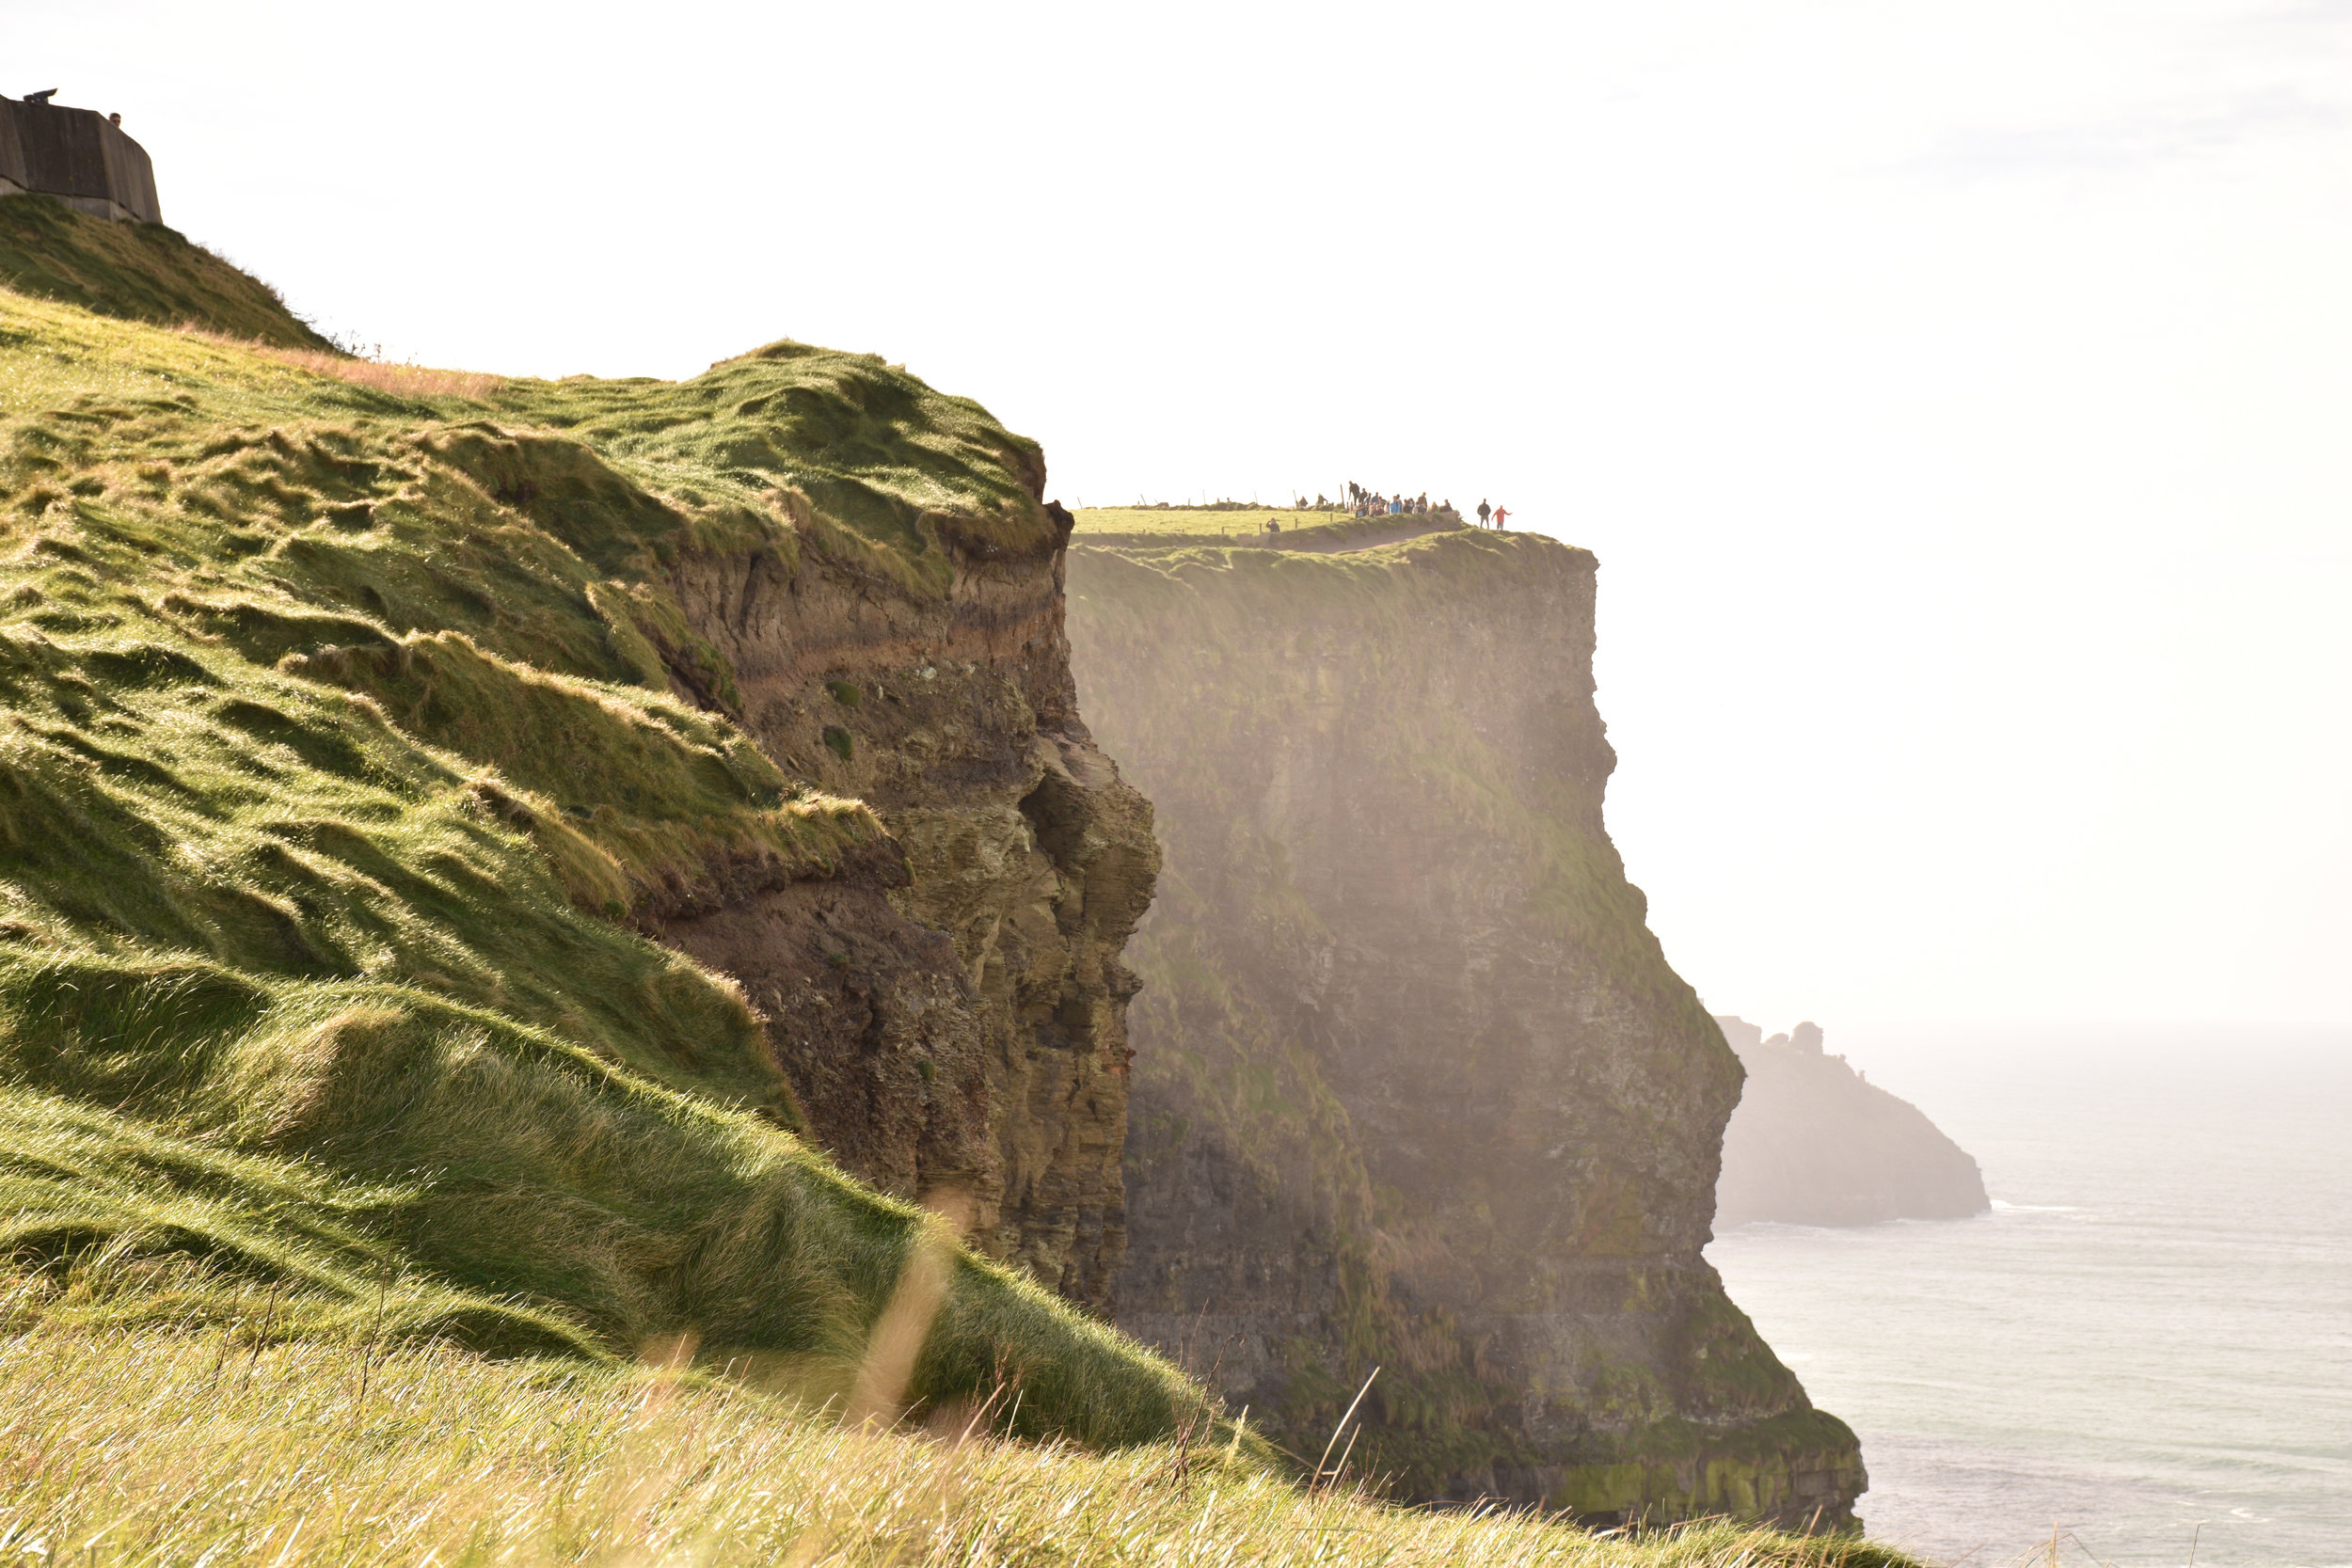 Looking outward on the Cliffs of Moher